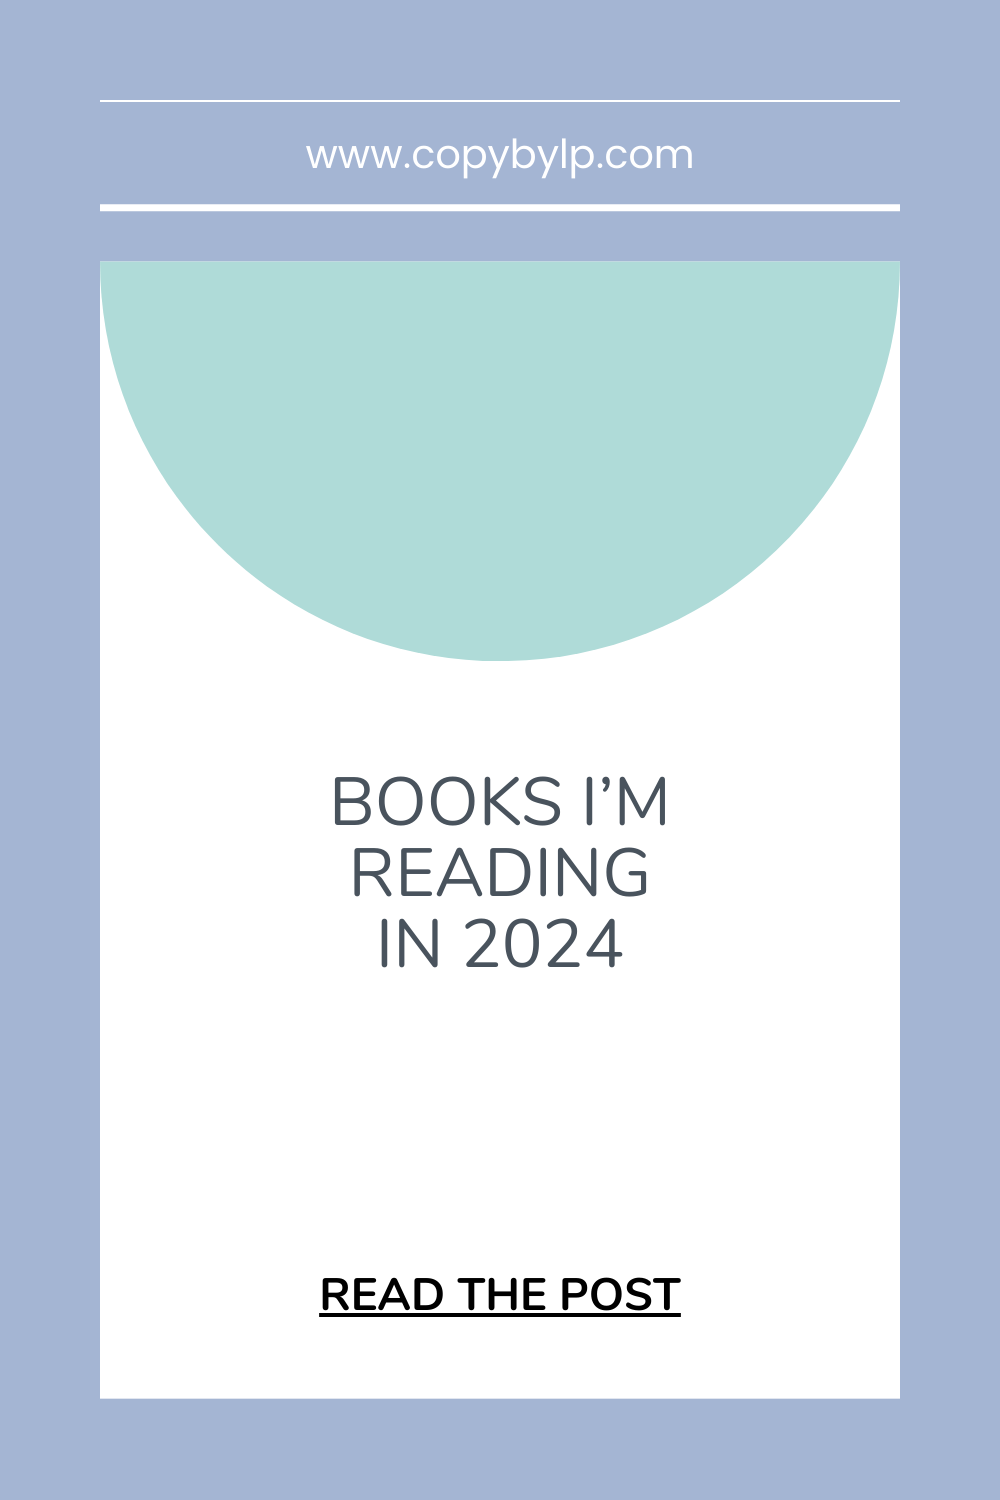 Books I'm reading in 2024 blog graphic